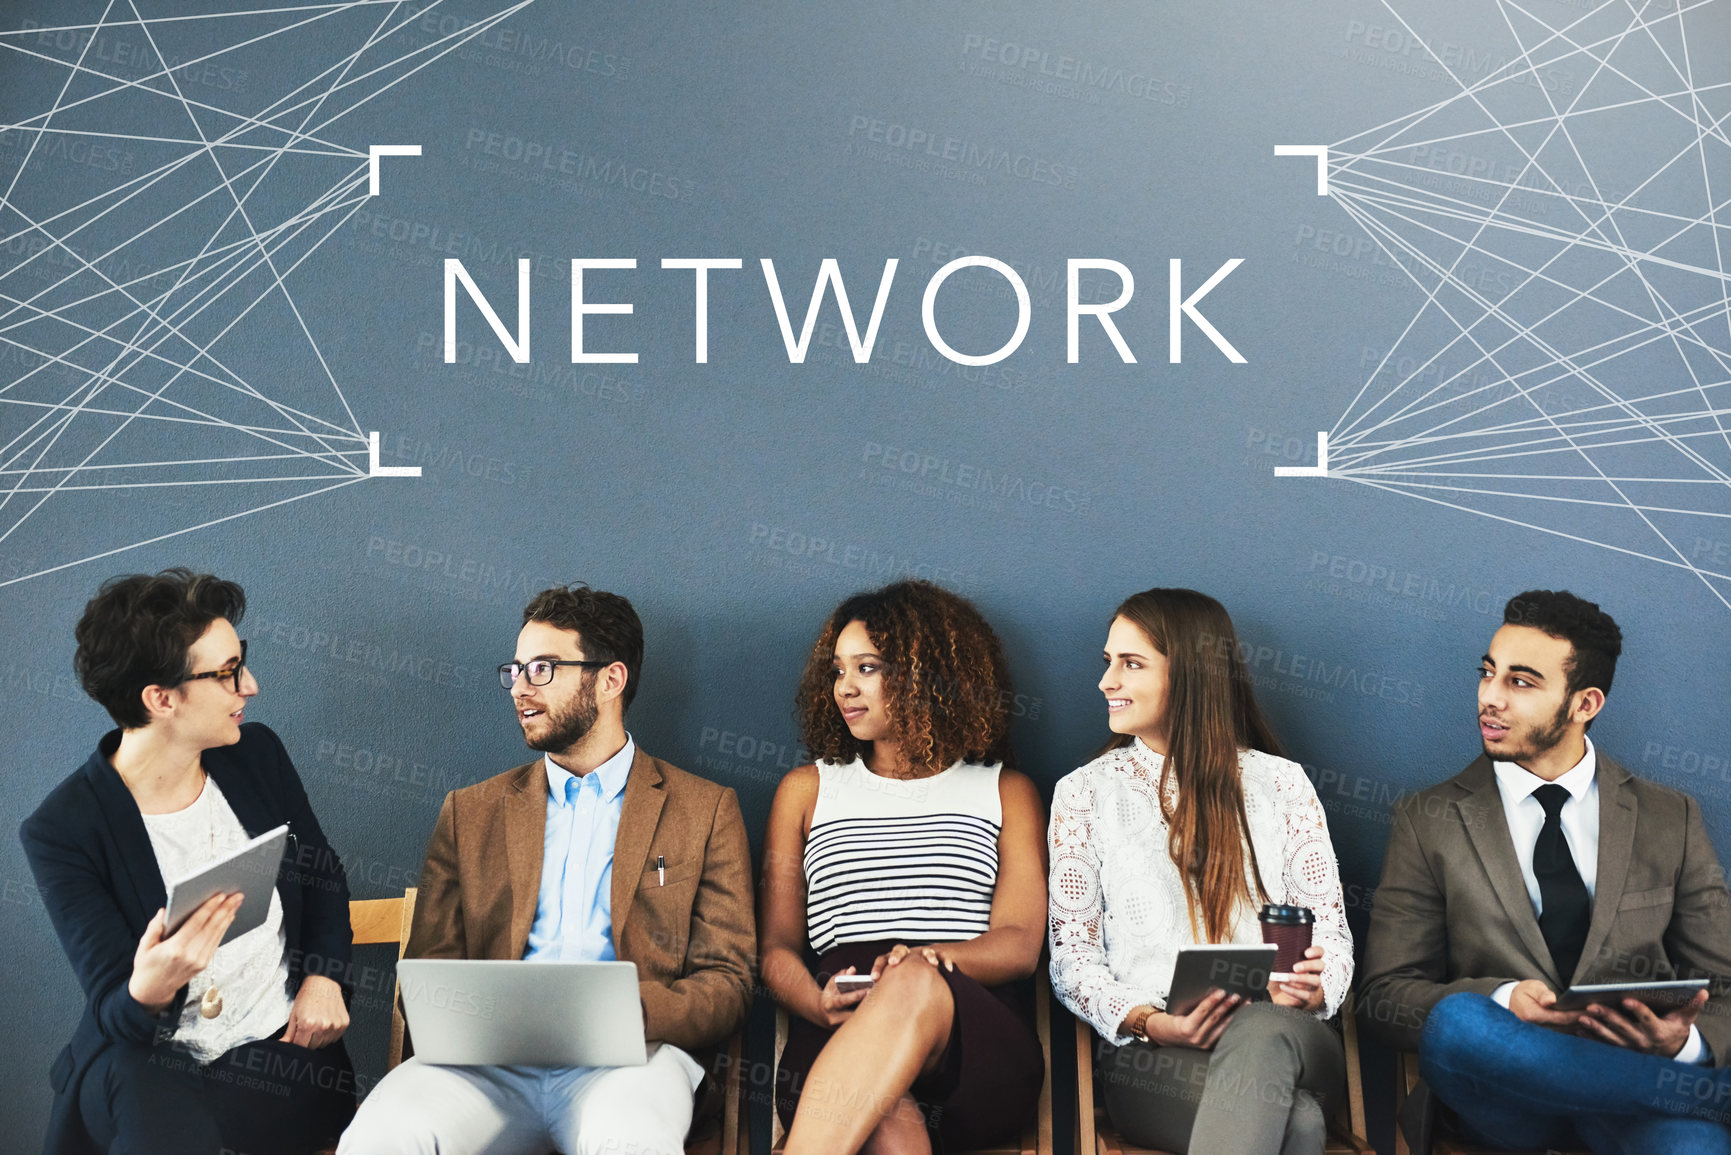 Buy stock photo Studio shot of businesspeople using wireless technology in a line with the word network above them against a gray background